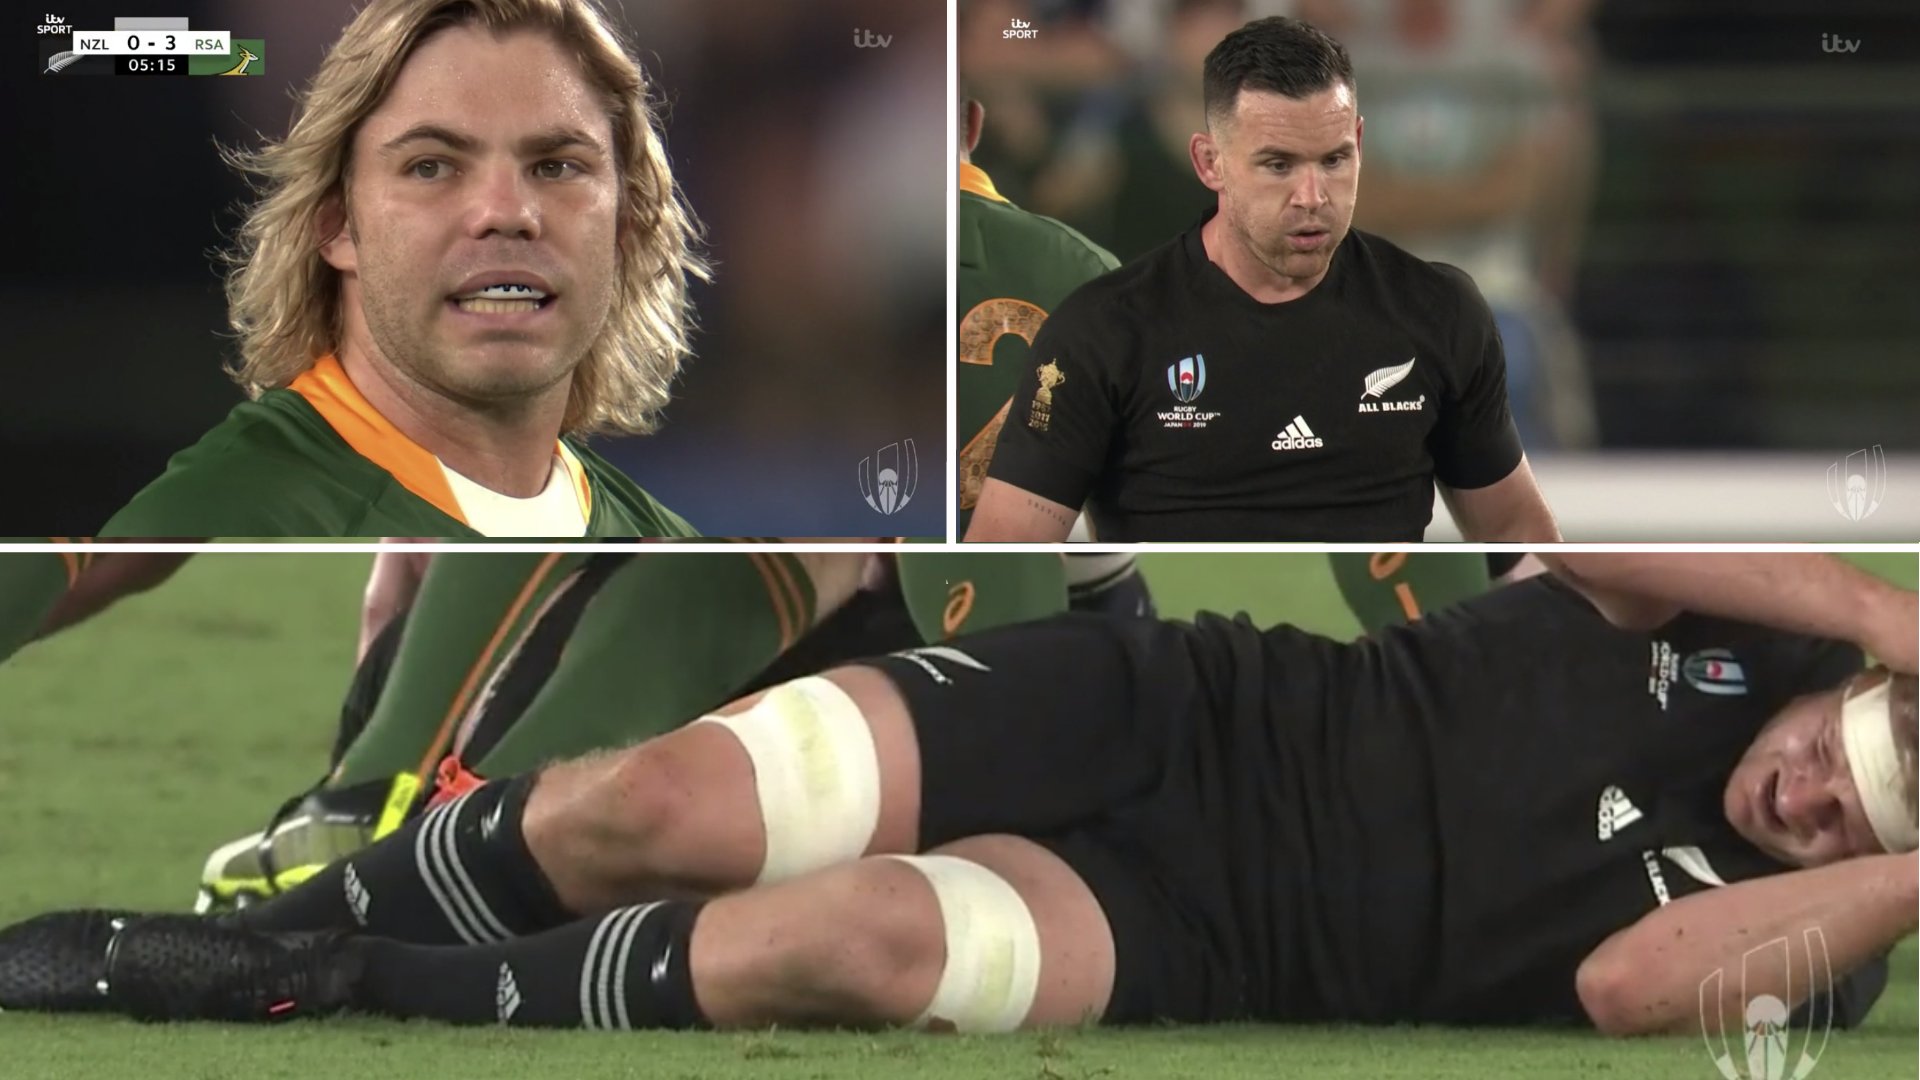 WATCH: All Blacks dominating in UNBELIEVABLY intense World Cup match